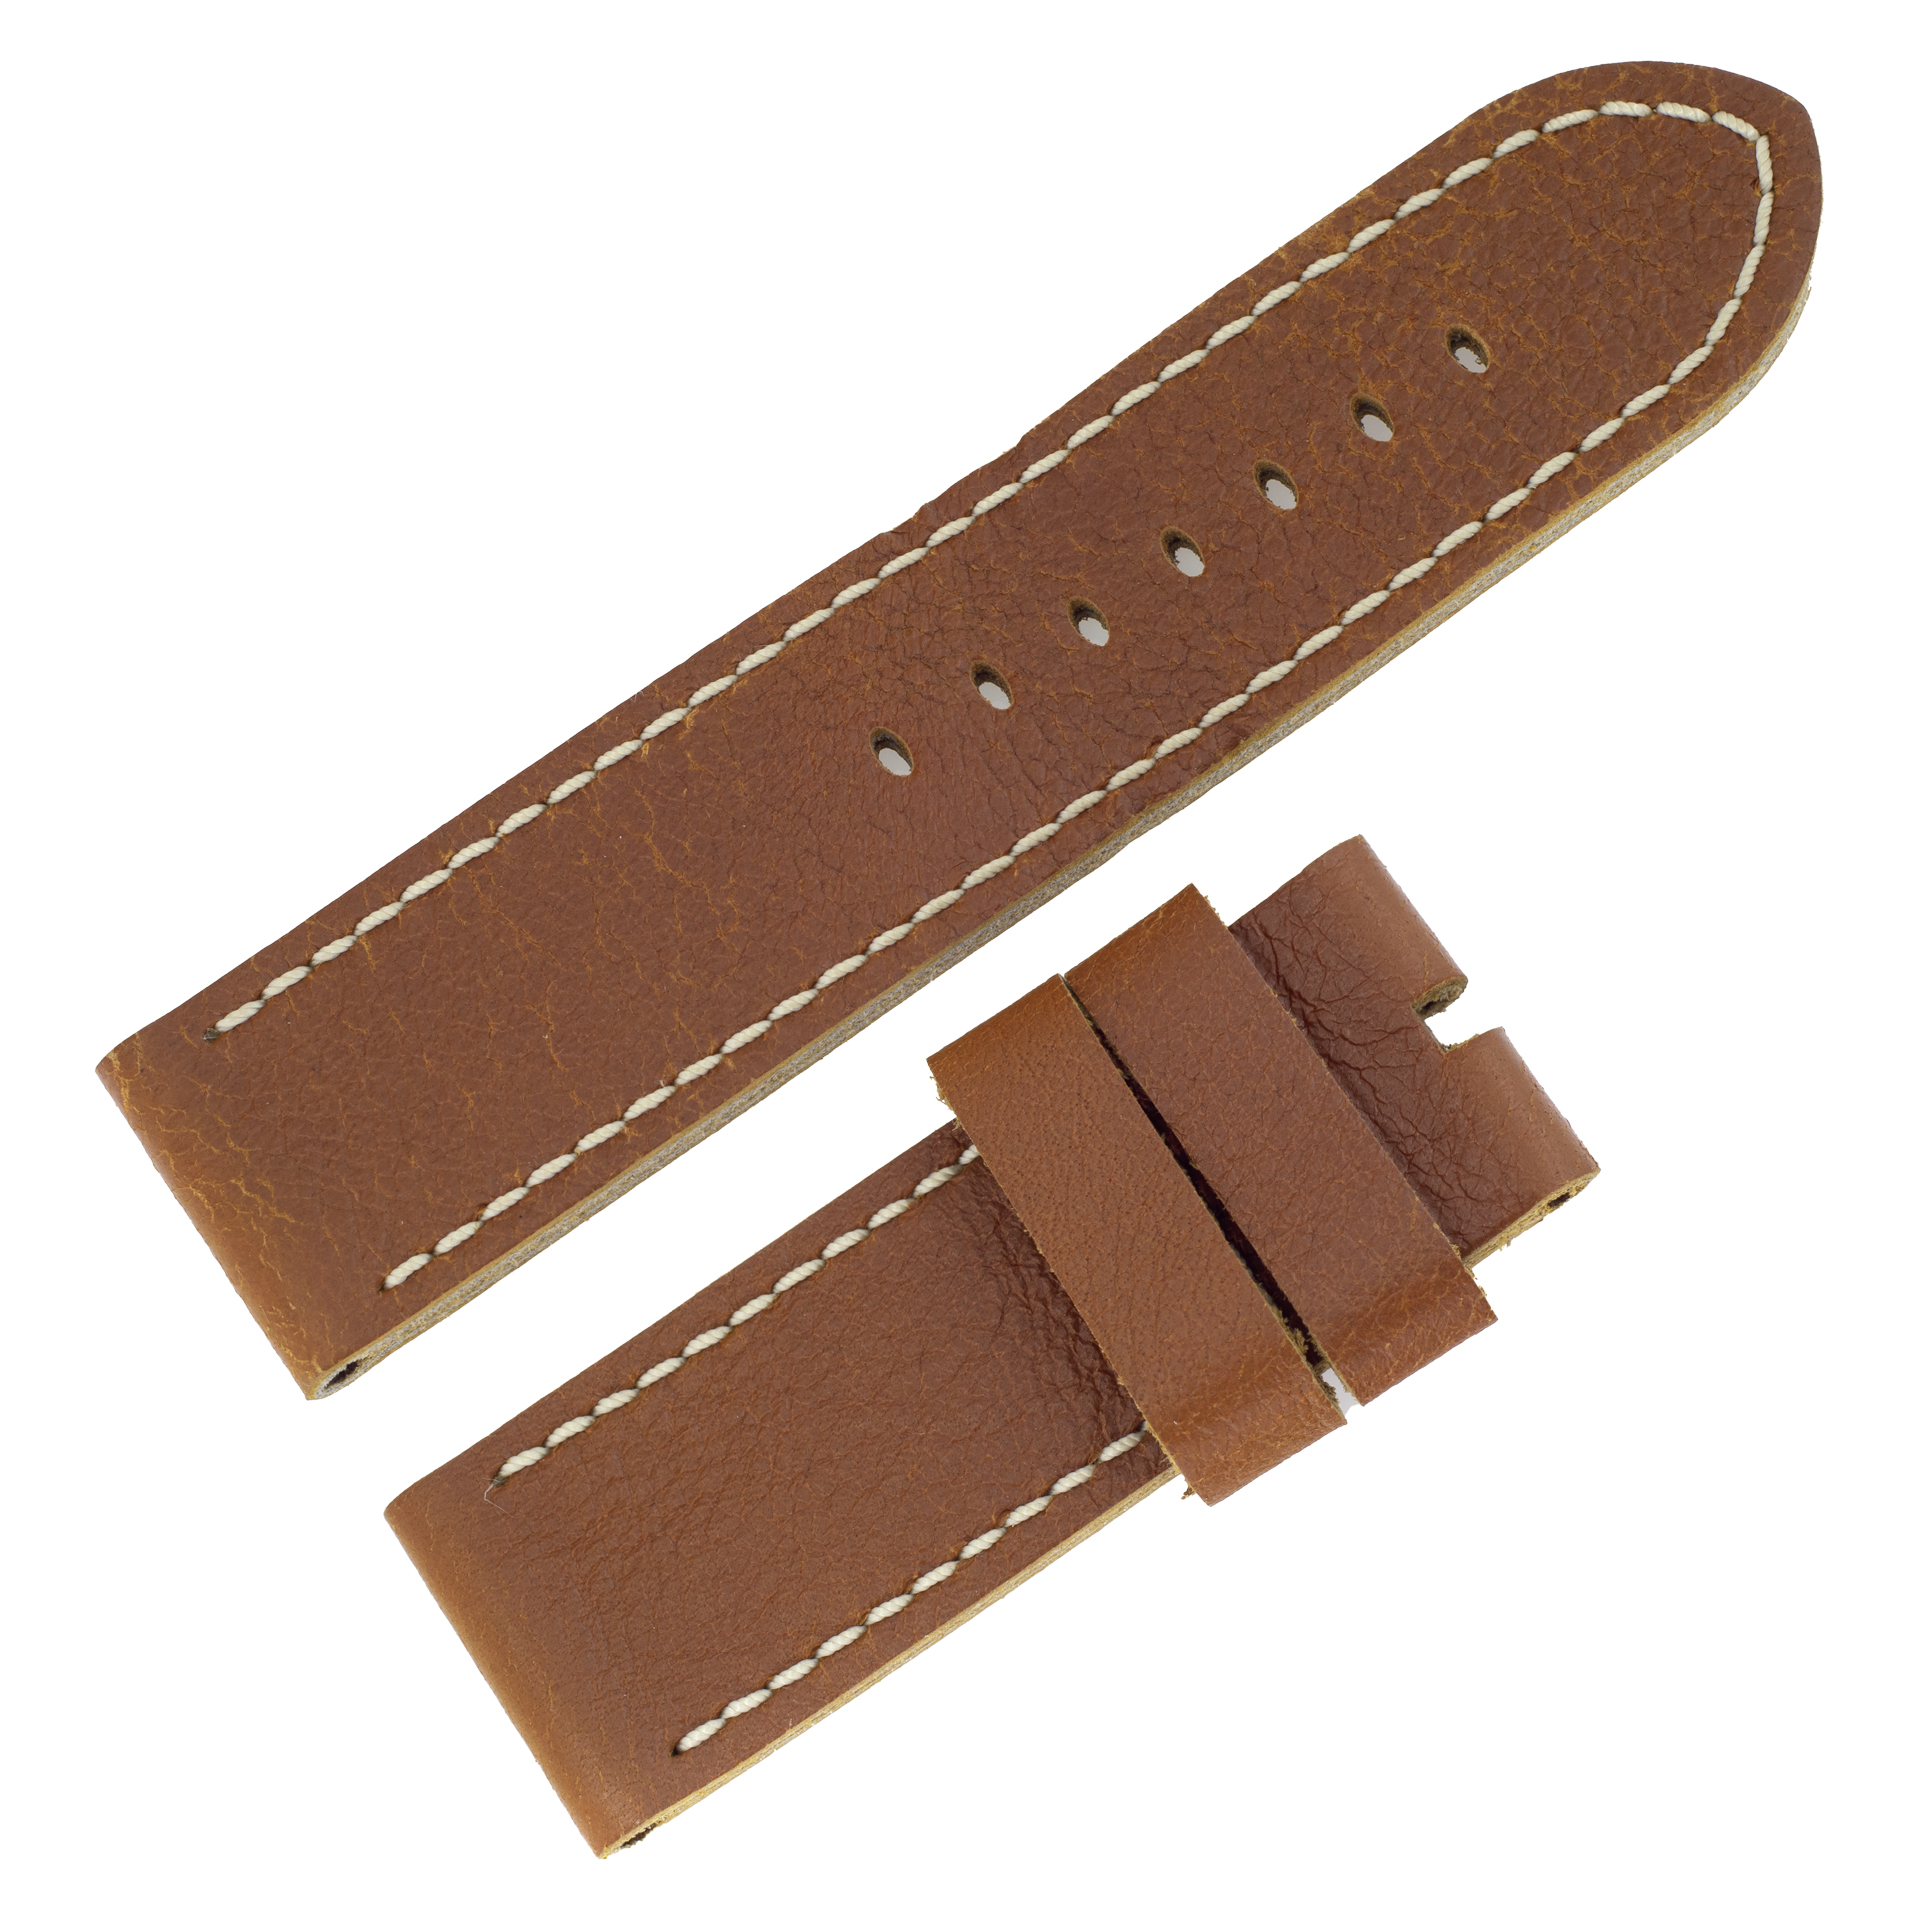 Panerai brown leather strap (26mm x 26mm)